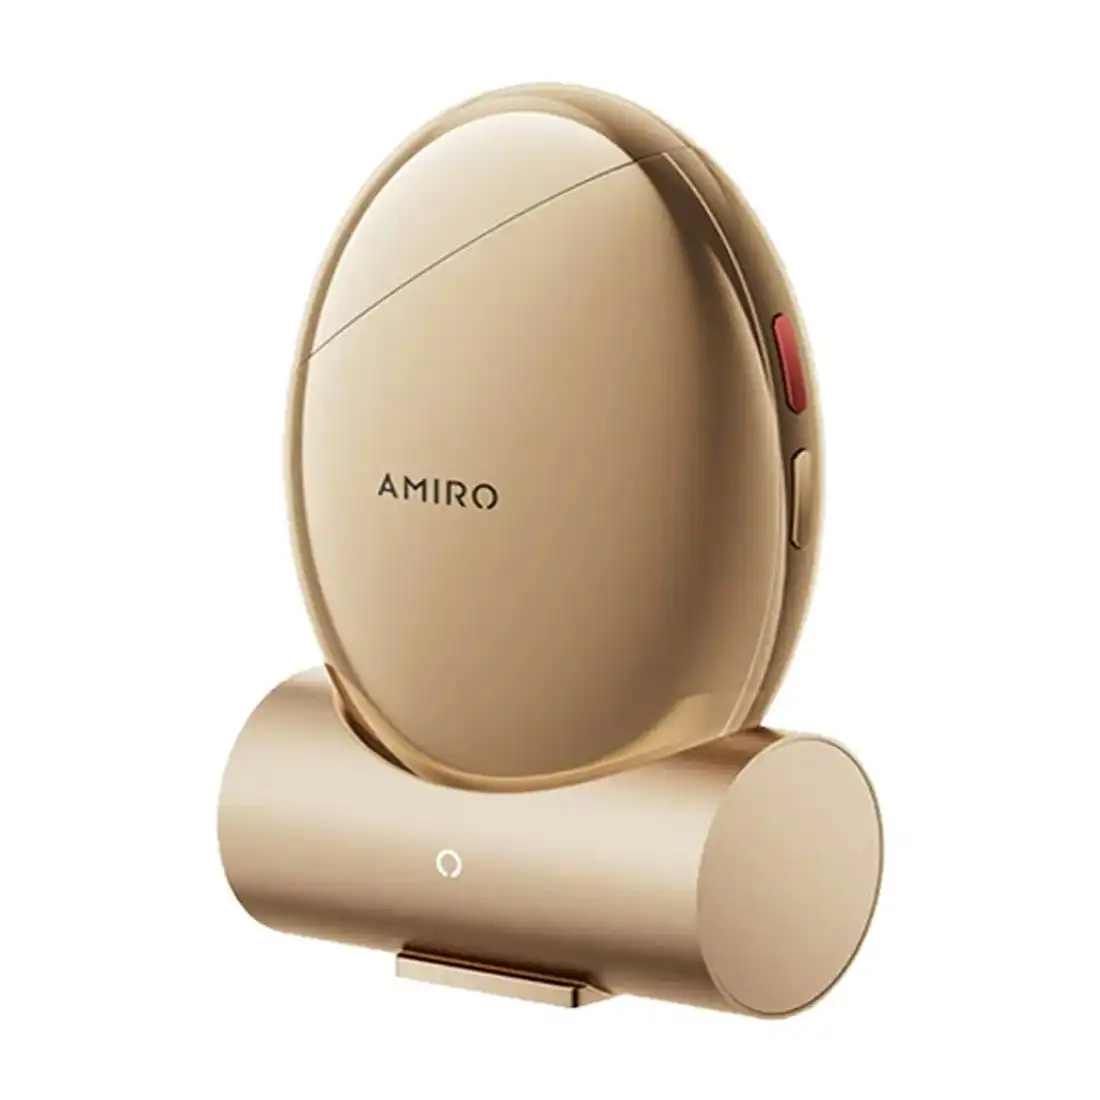 AMIRO S1 Facial RF Skin Tightening Device - Gold Limited Edition (CN)